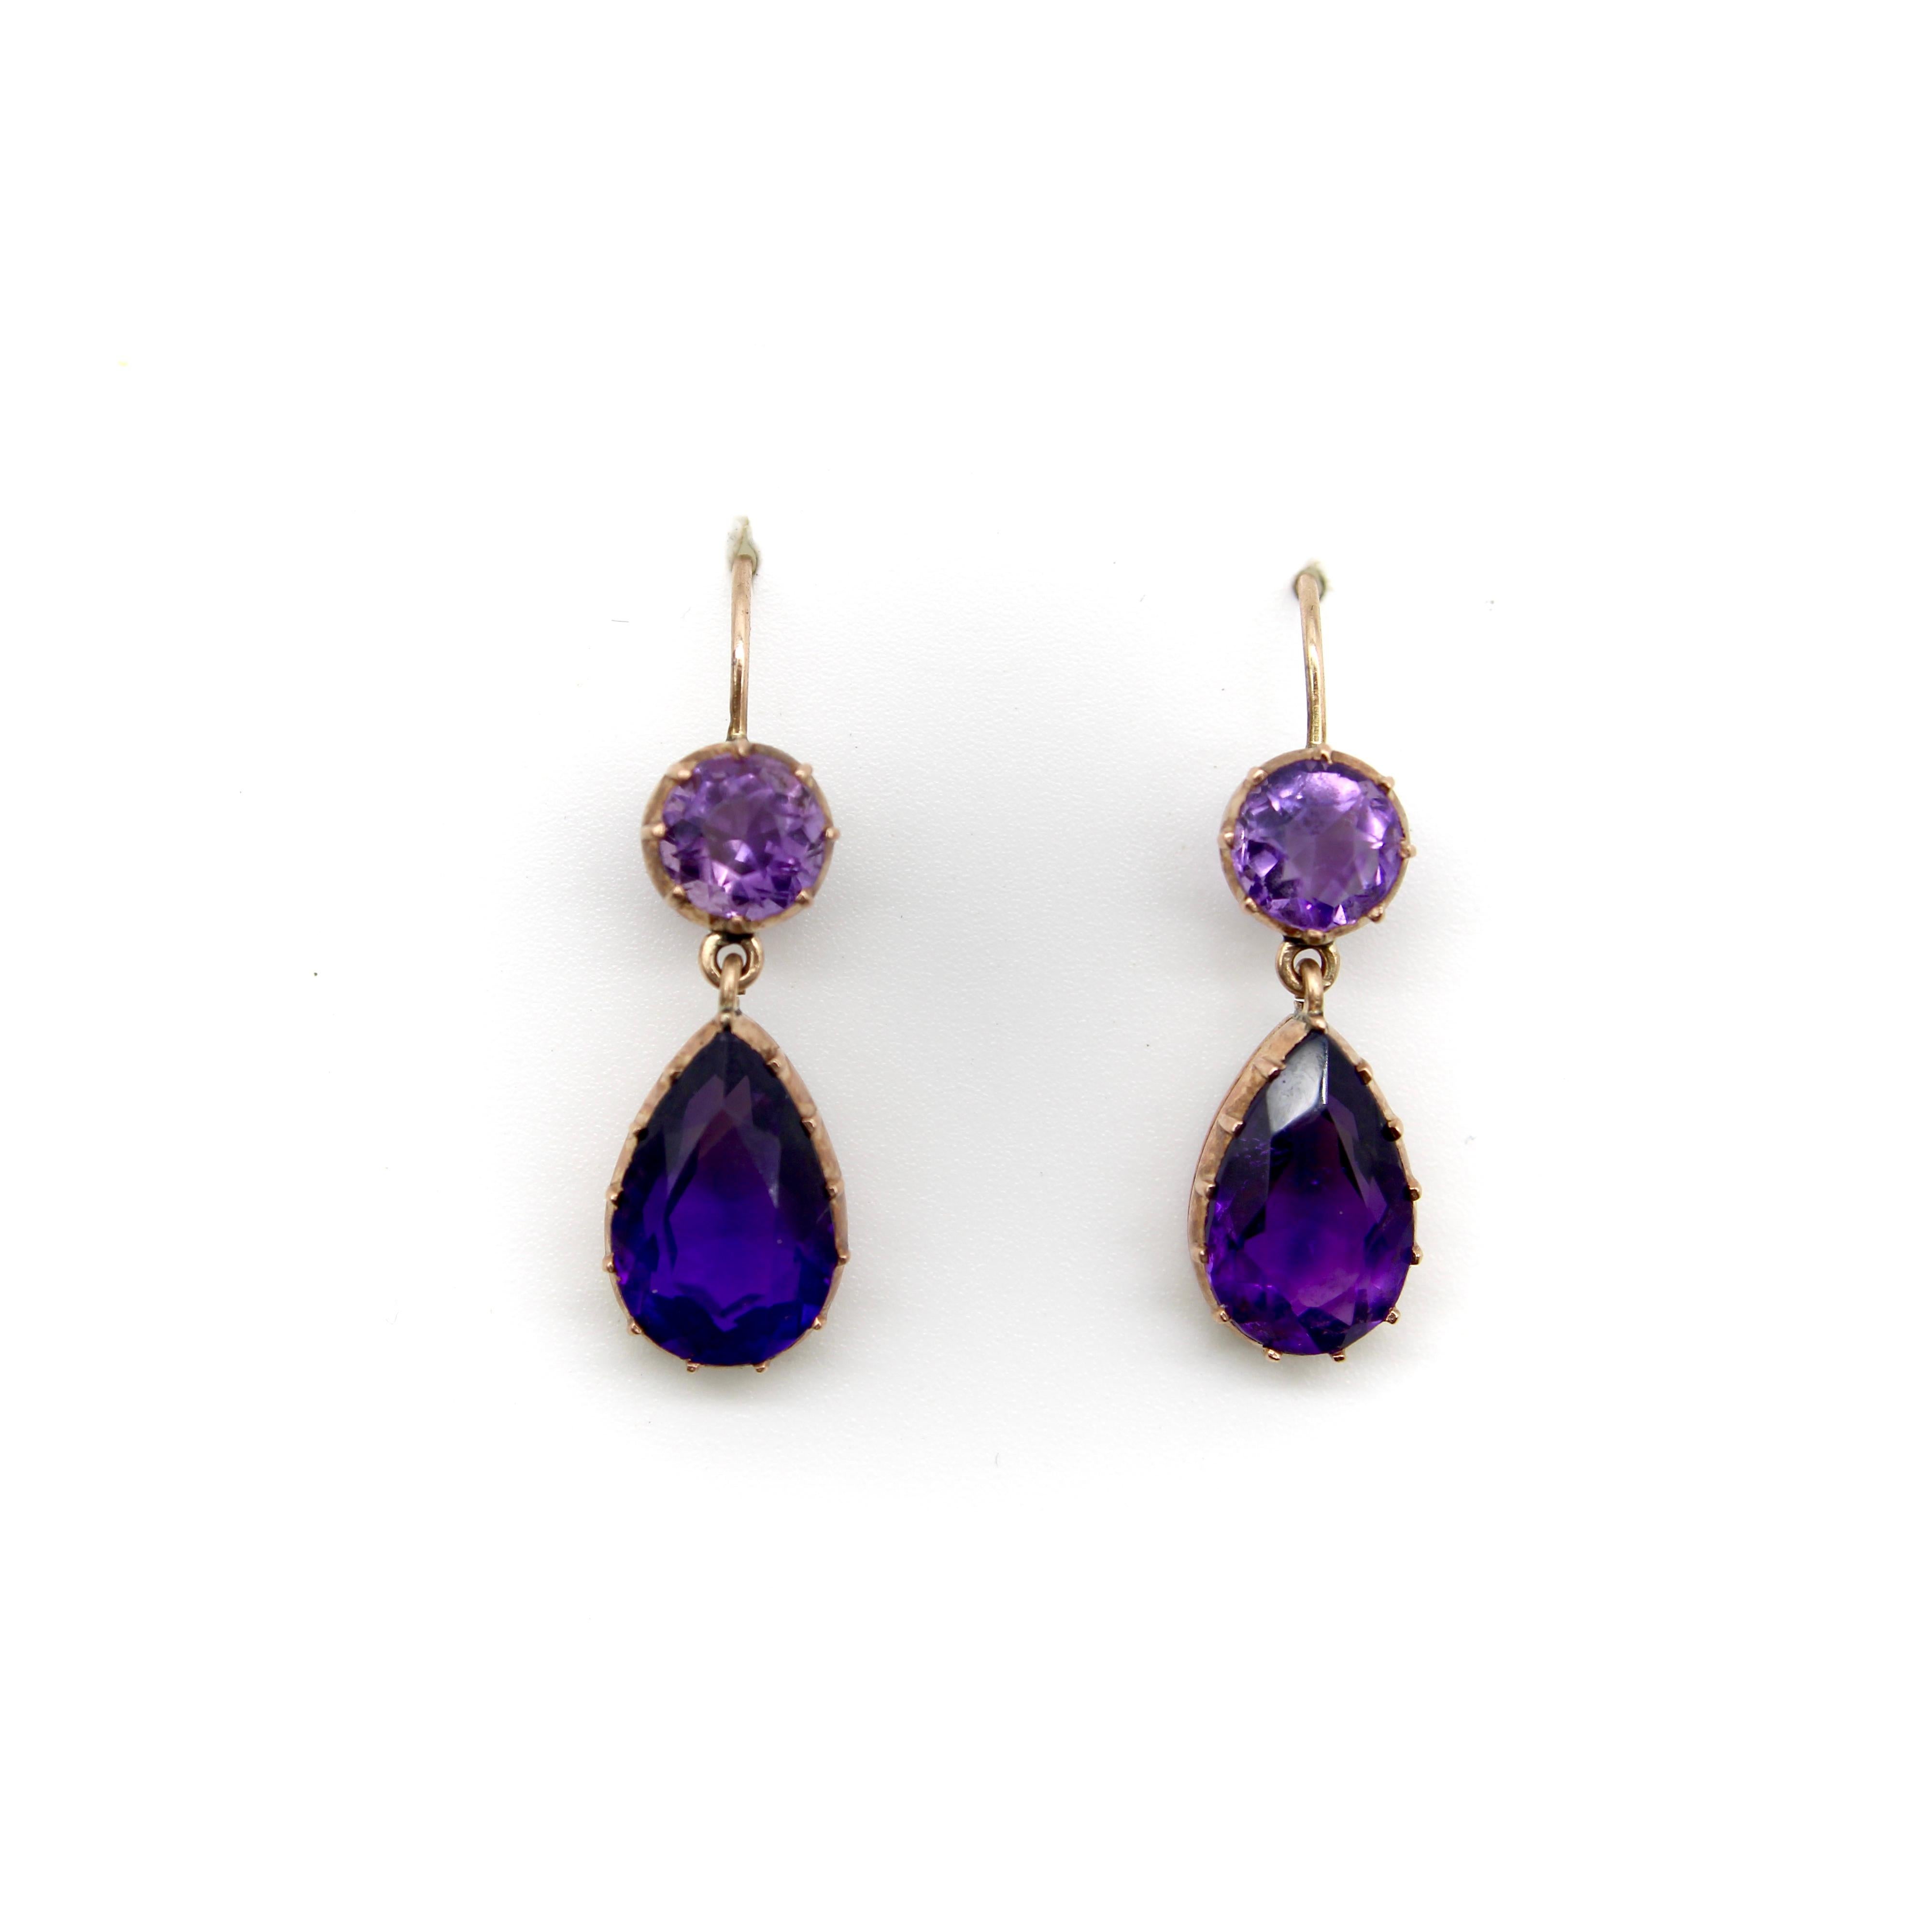 These 12k gold Victorian earrings feature beautifully saturated amethysts with pear shaped drops dangling from round gems. The stones are set in rose gold, which makes a gorgeous contrast with the saturated purple. The stones are collet set—an older